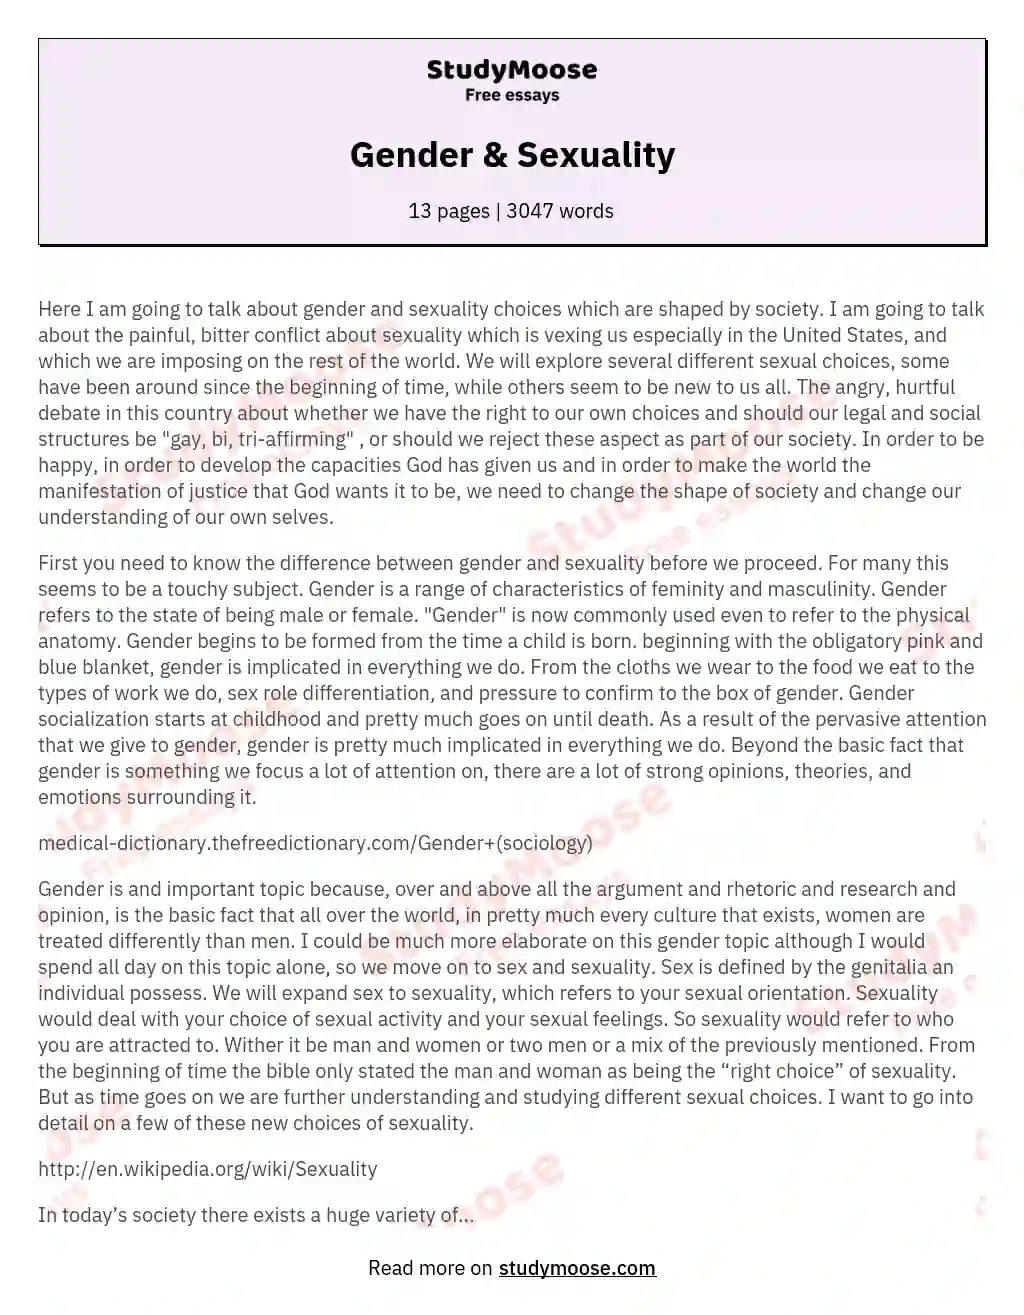 Gender & Sexuality essay